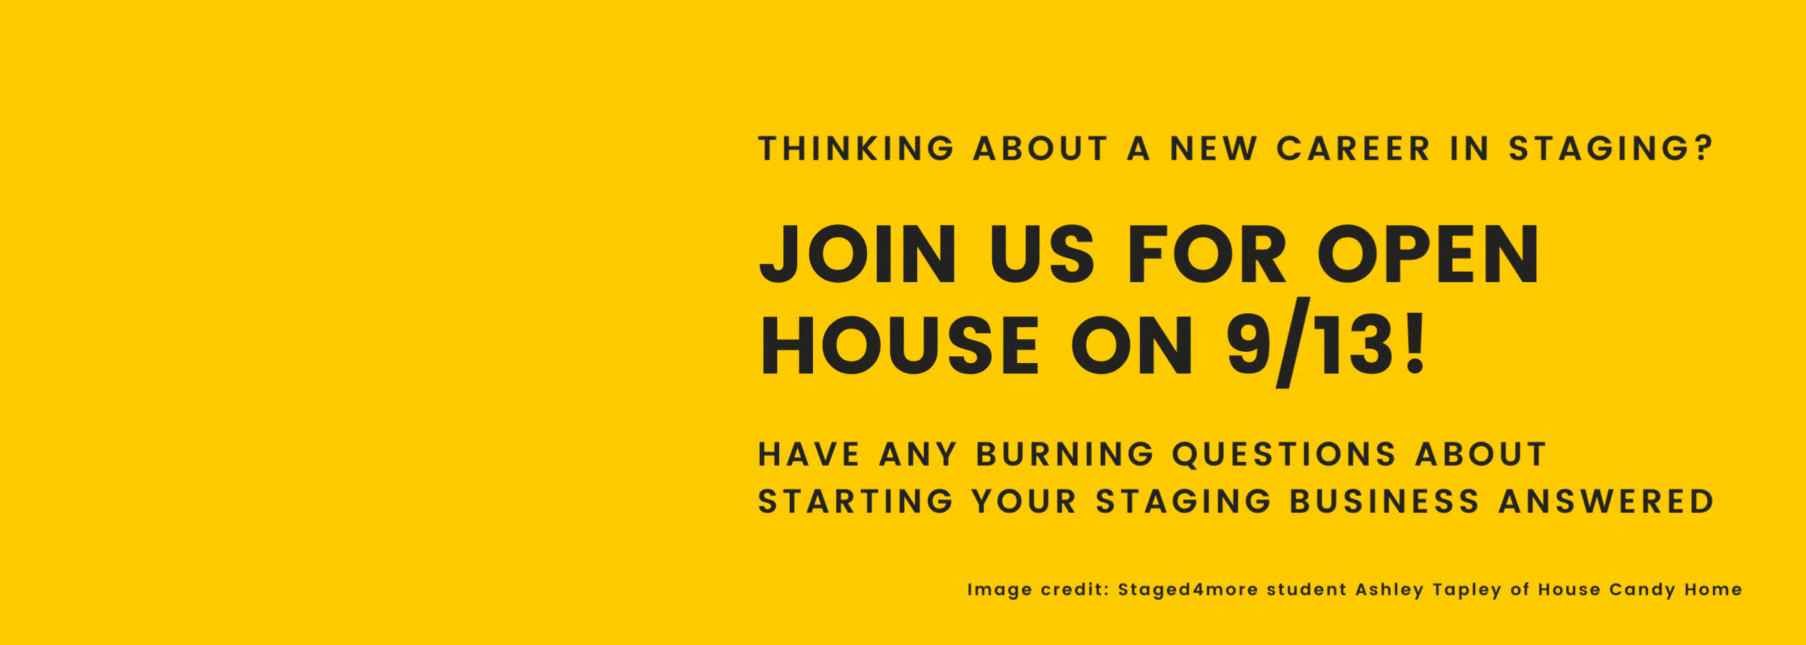 Starting a home staging business? Join us for Open House and find out more our home staging courses and programs!